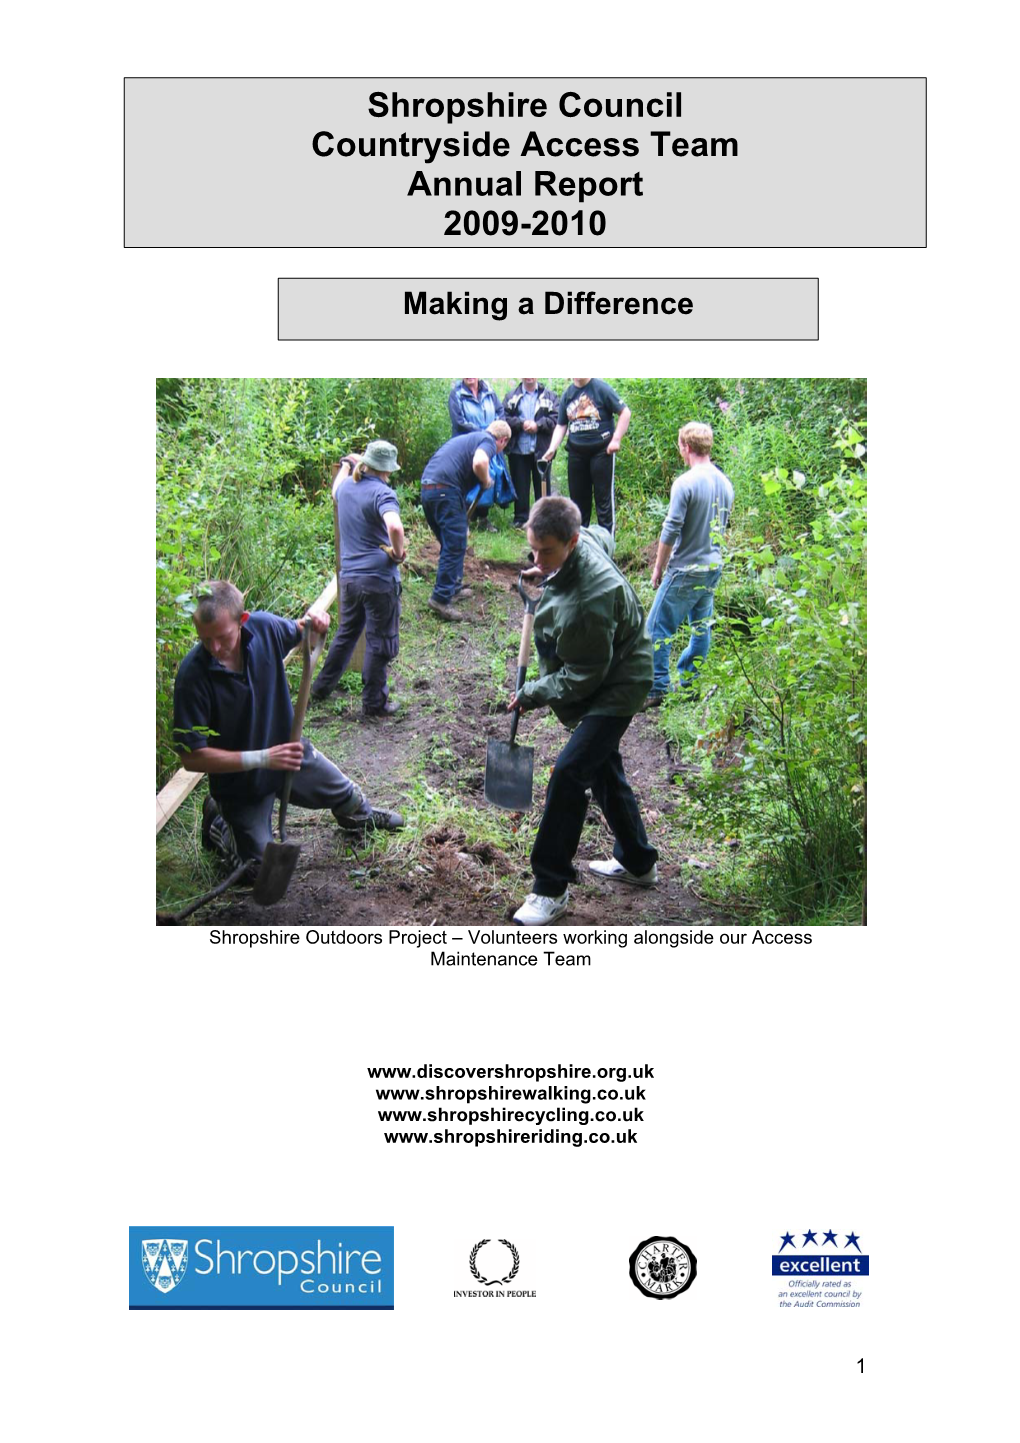 Shropshire Council Countryside Access Team Annual Report 2009-2010